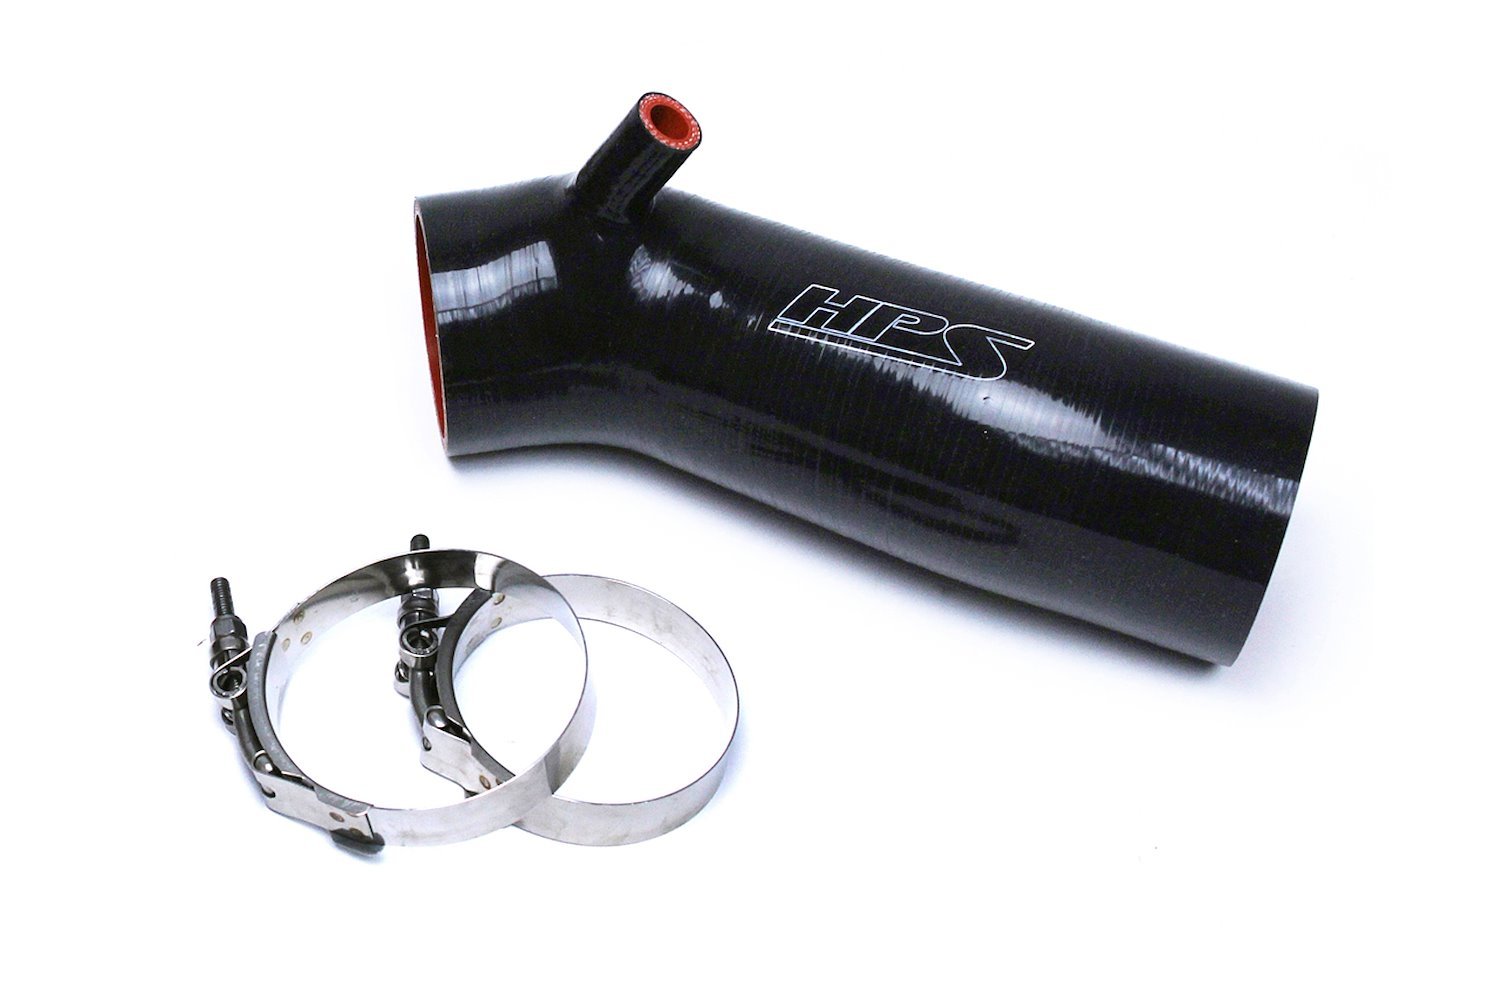 57-1445-BLK Silicone Air Intake, Replace Stock Restrictive Air Intake, Improve Throttle Response, No Heat Soak